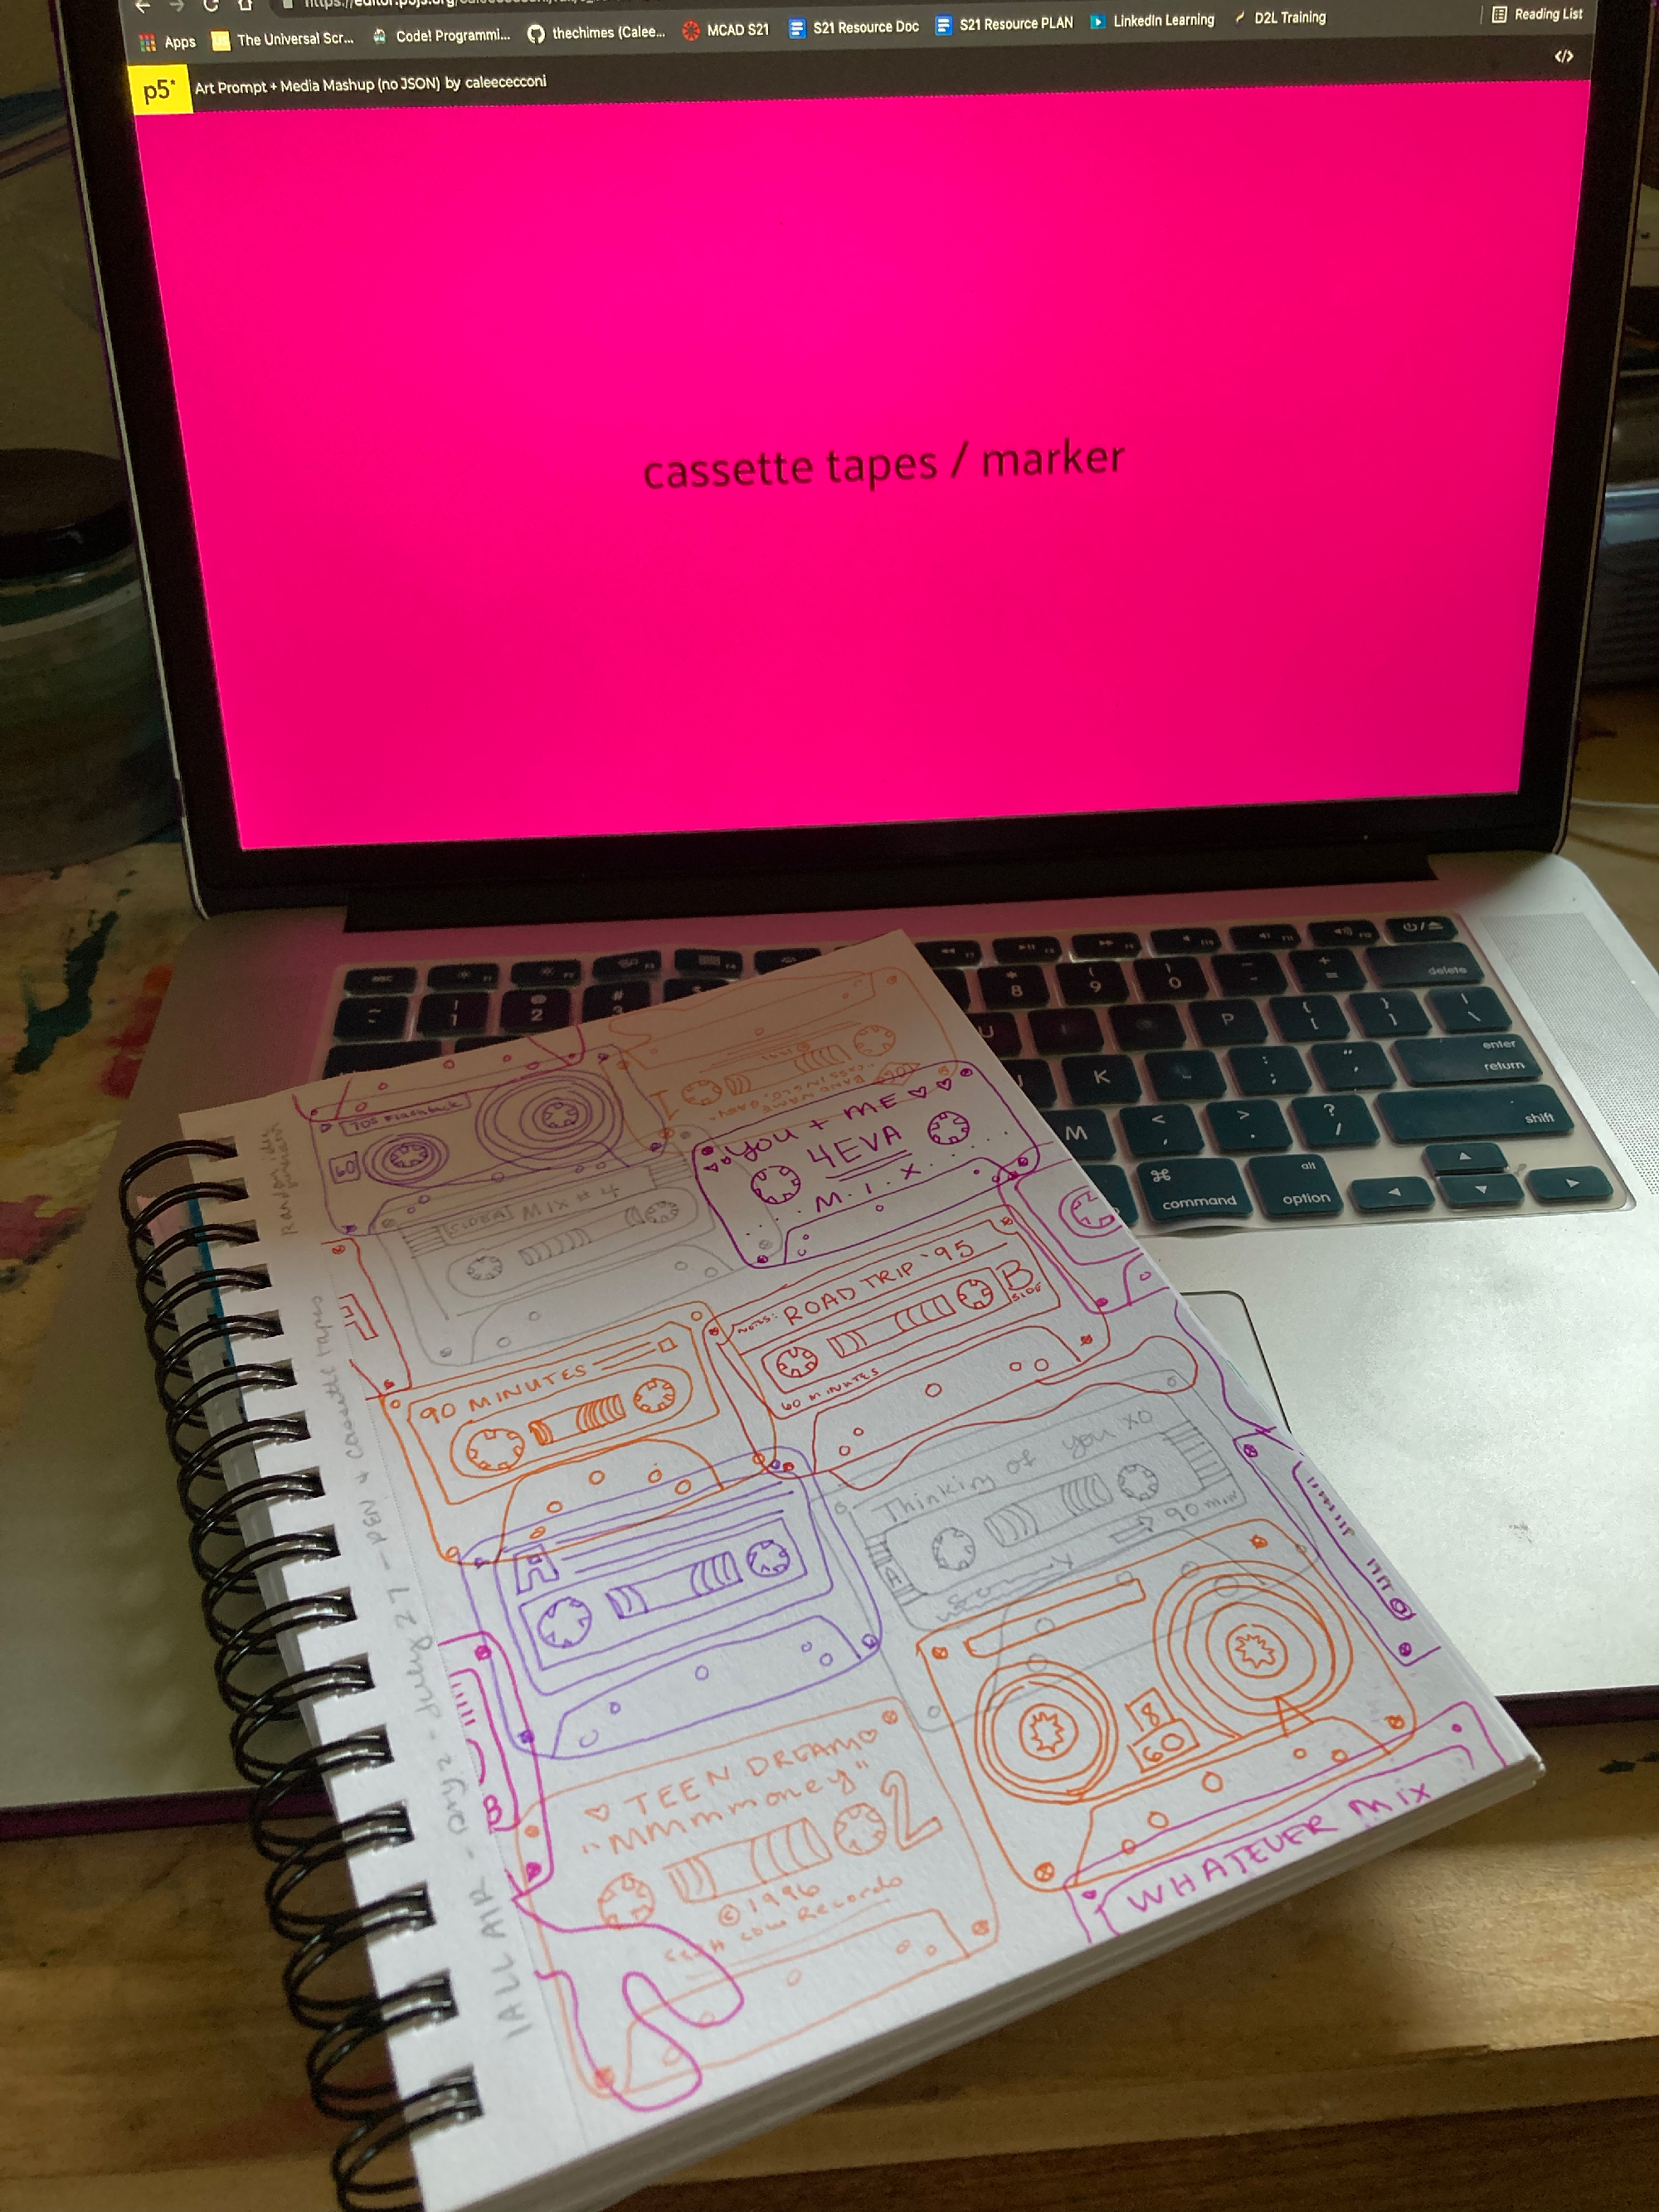 laptop computer with the words "cassette tape" and "marker" with a sketchbook open to a page of cassette tape drawings